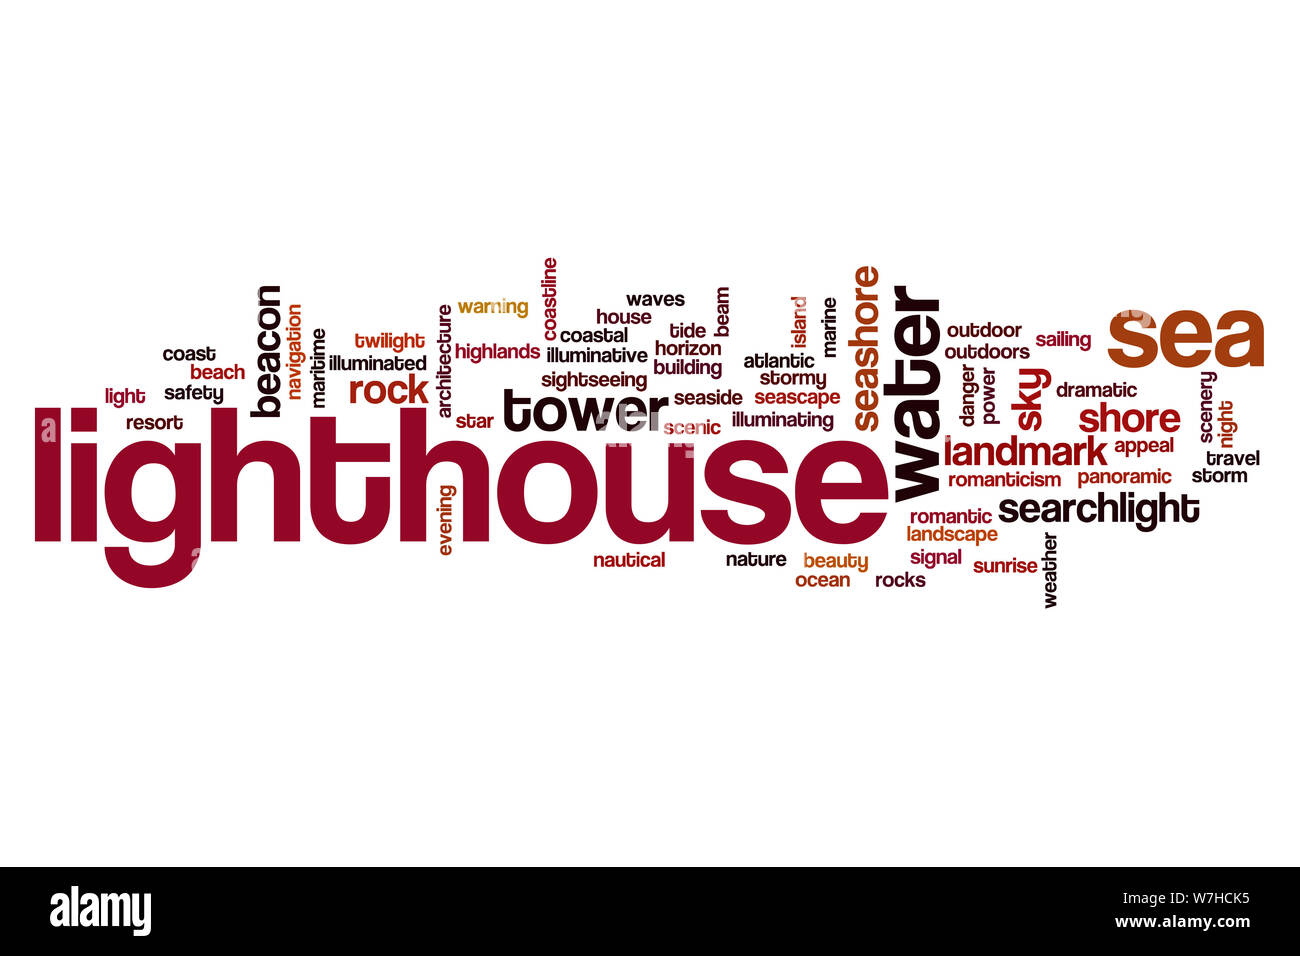 Lighthouse word cloud concept Stock Photo